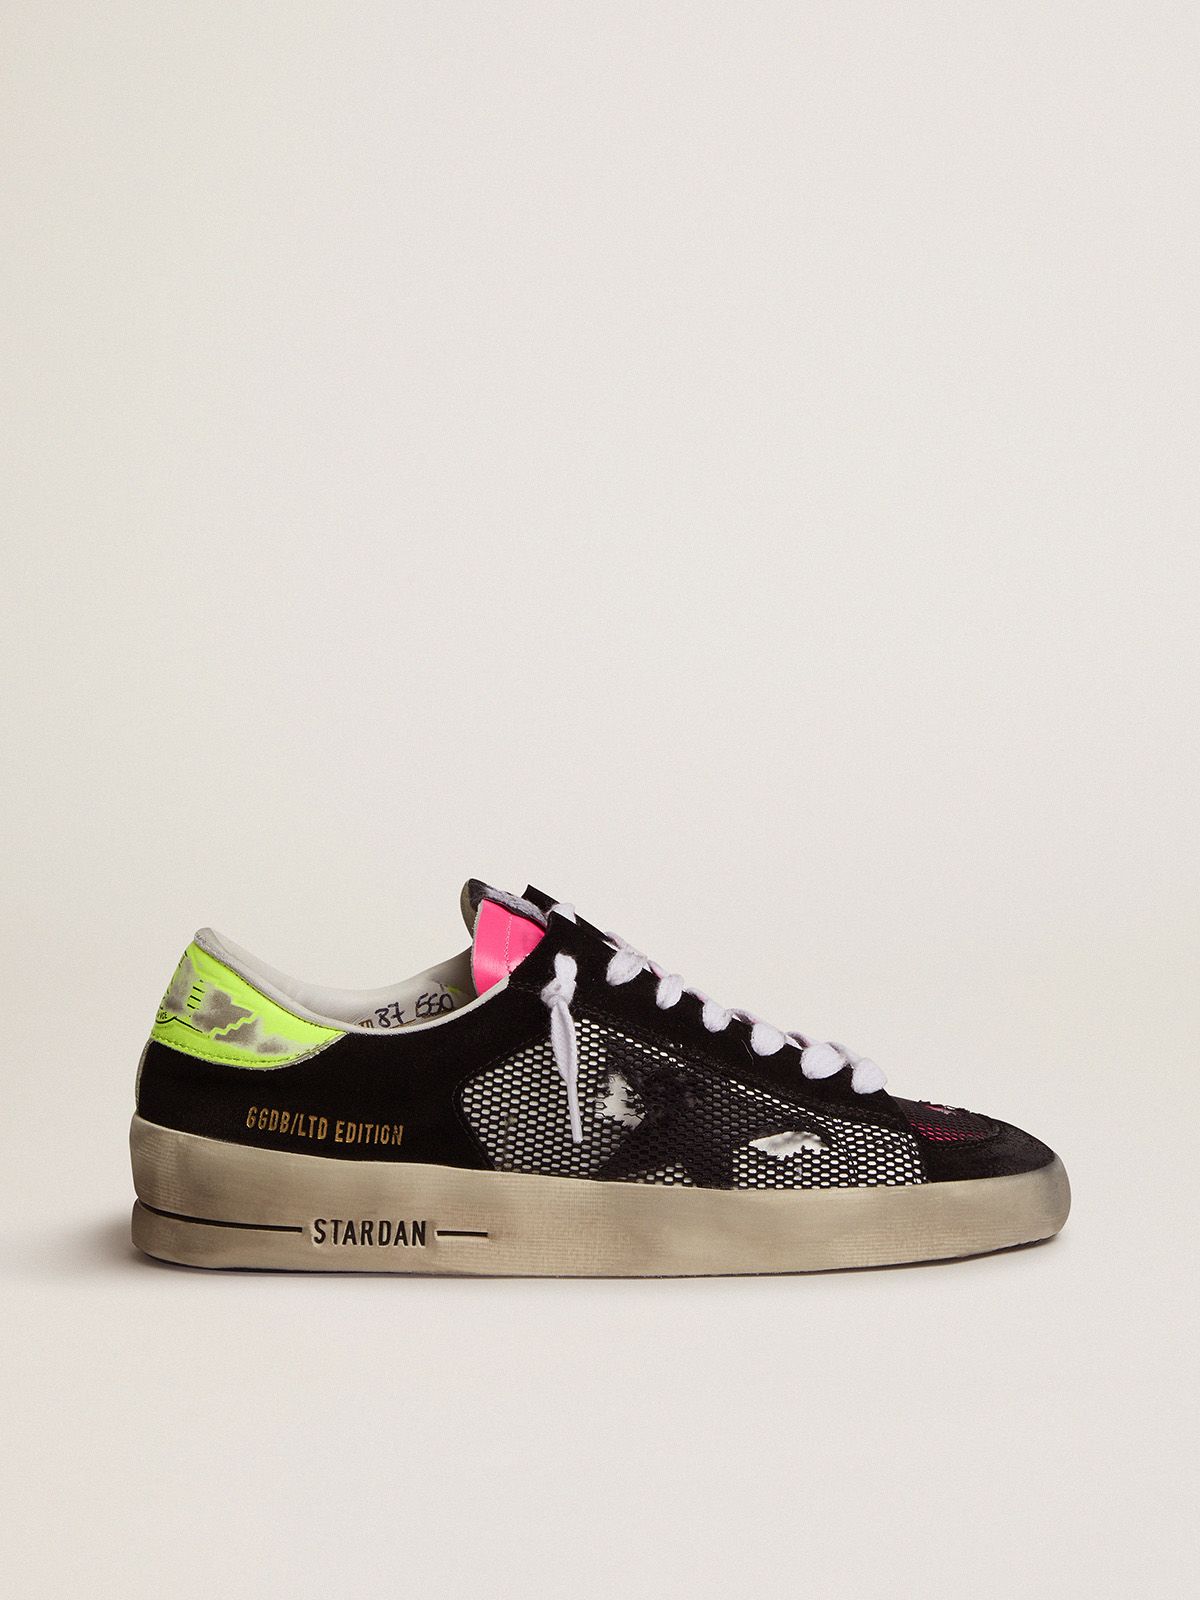 Women’s Limited Edition Stardan sneakers in fuchsia and yellow | 